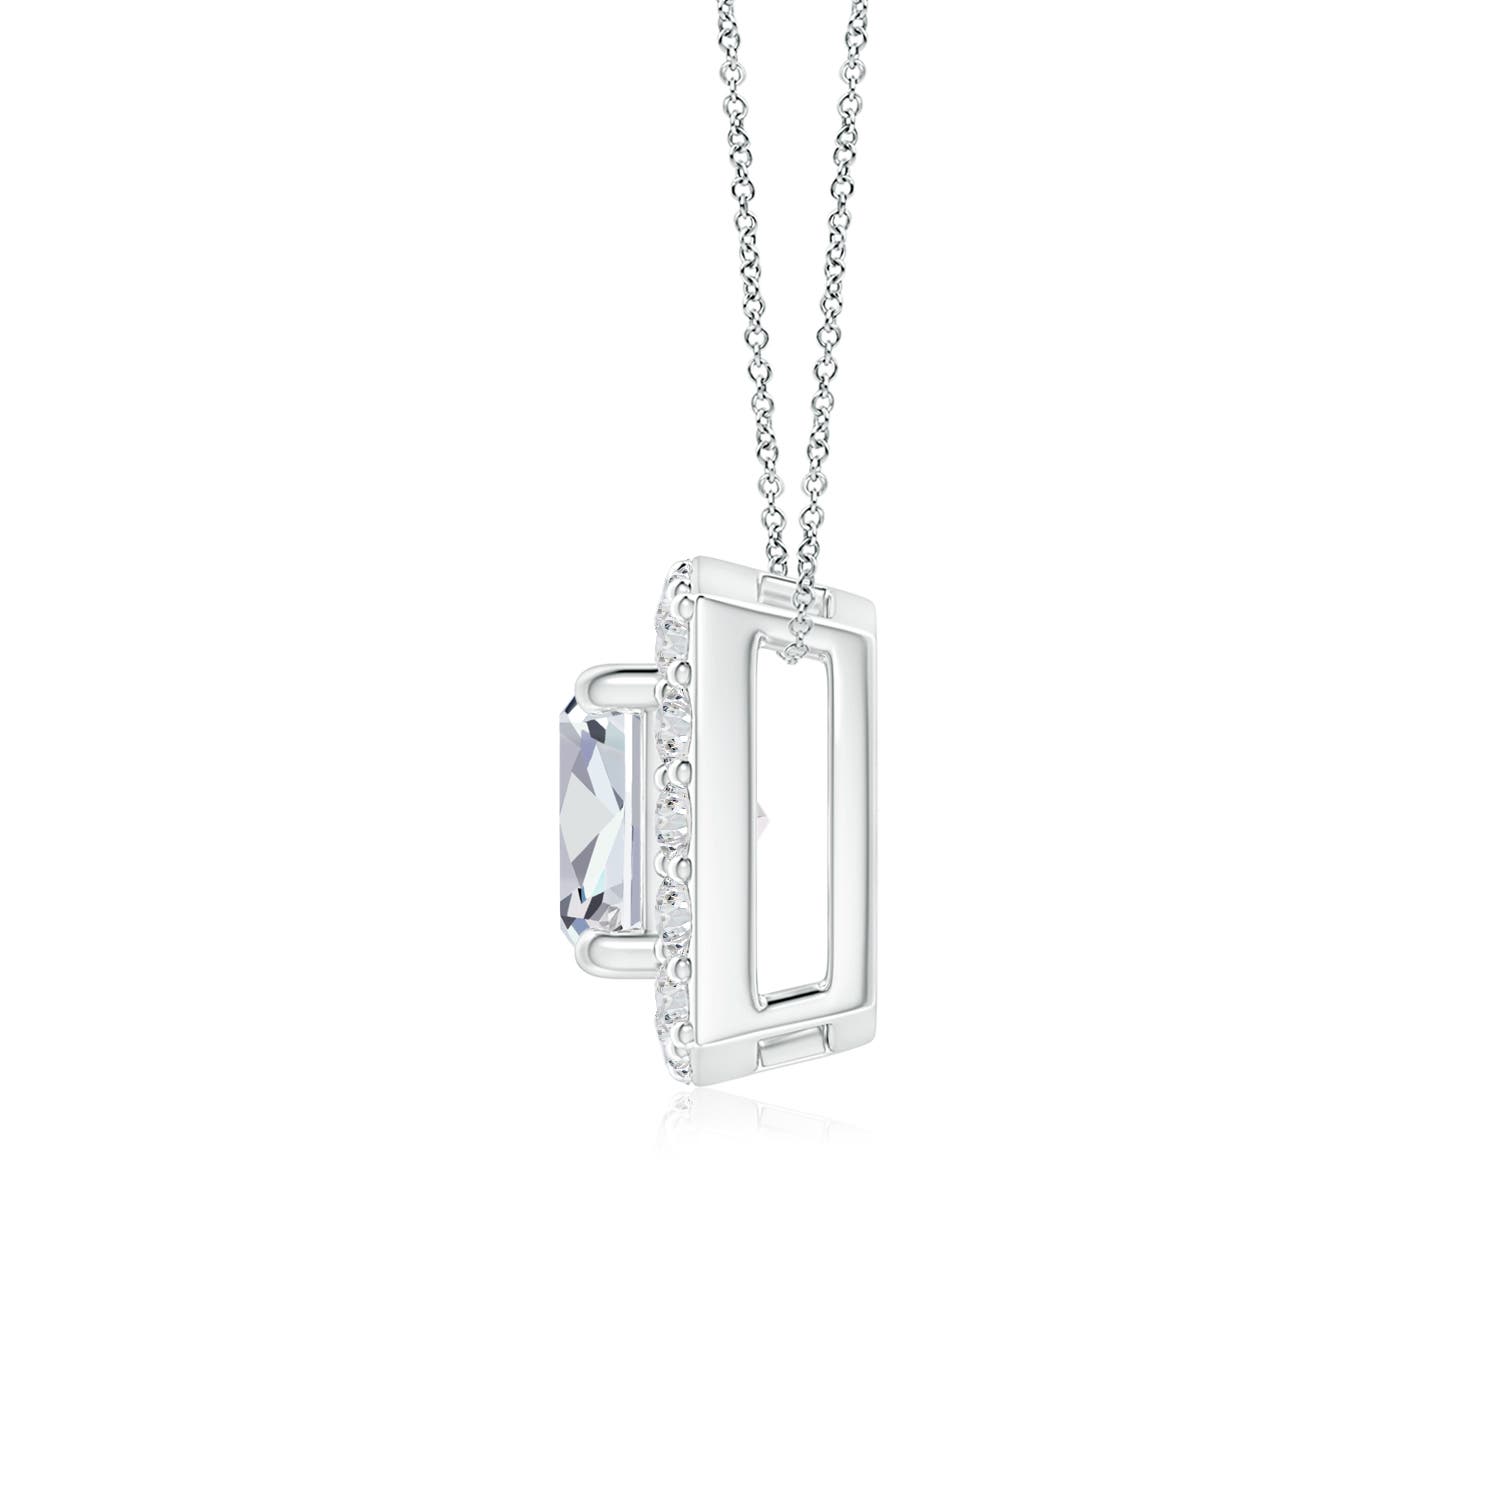 H, SI2 / 0.52 CT / 14 KT White Gold